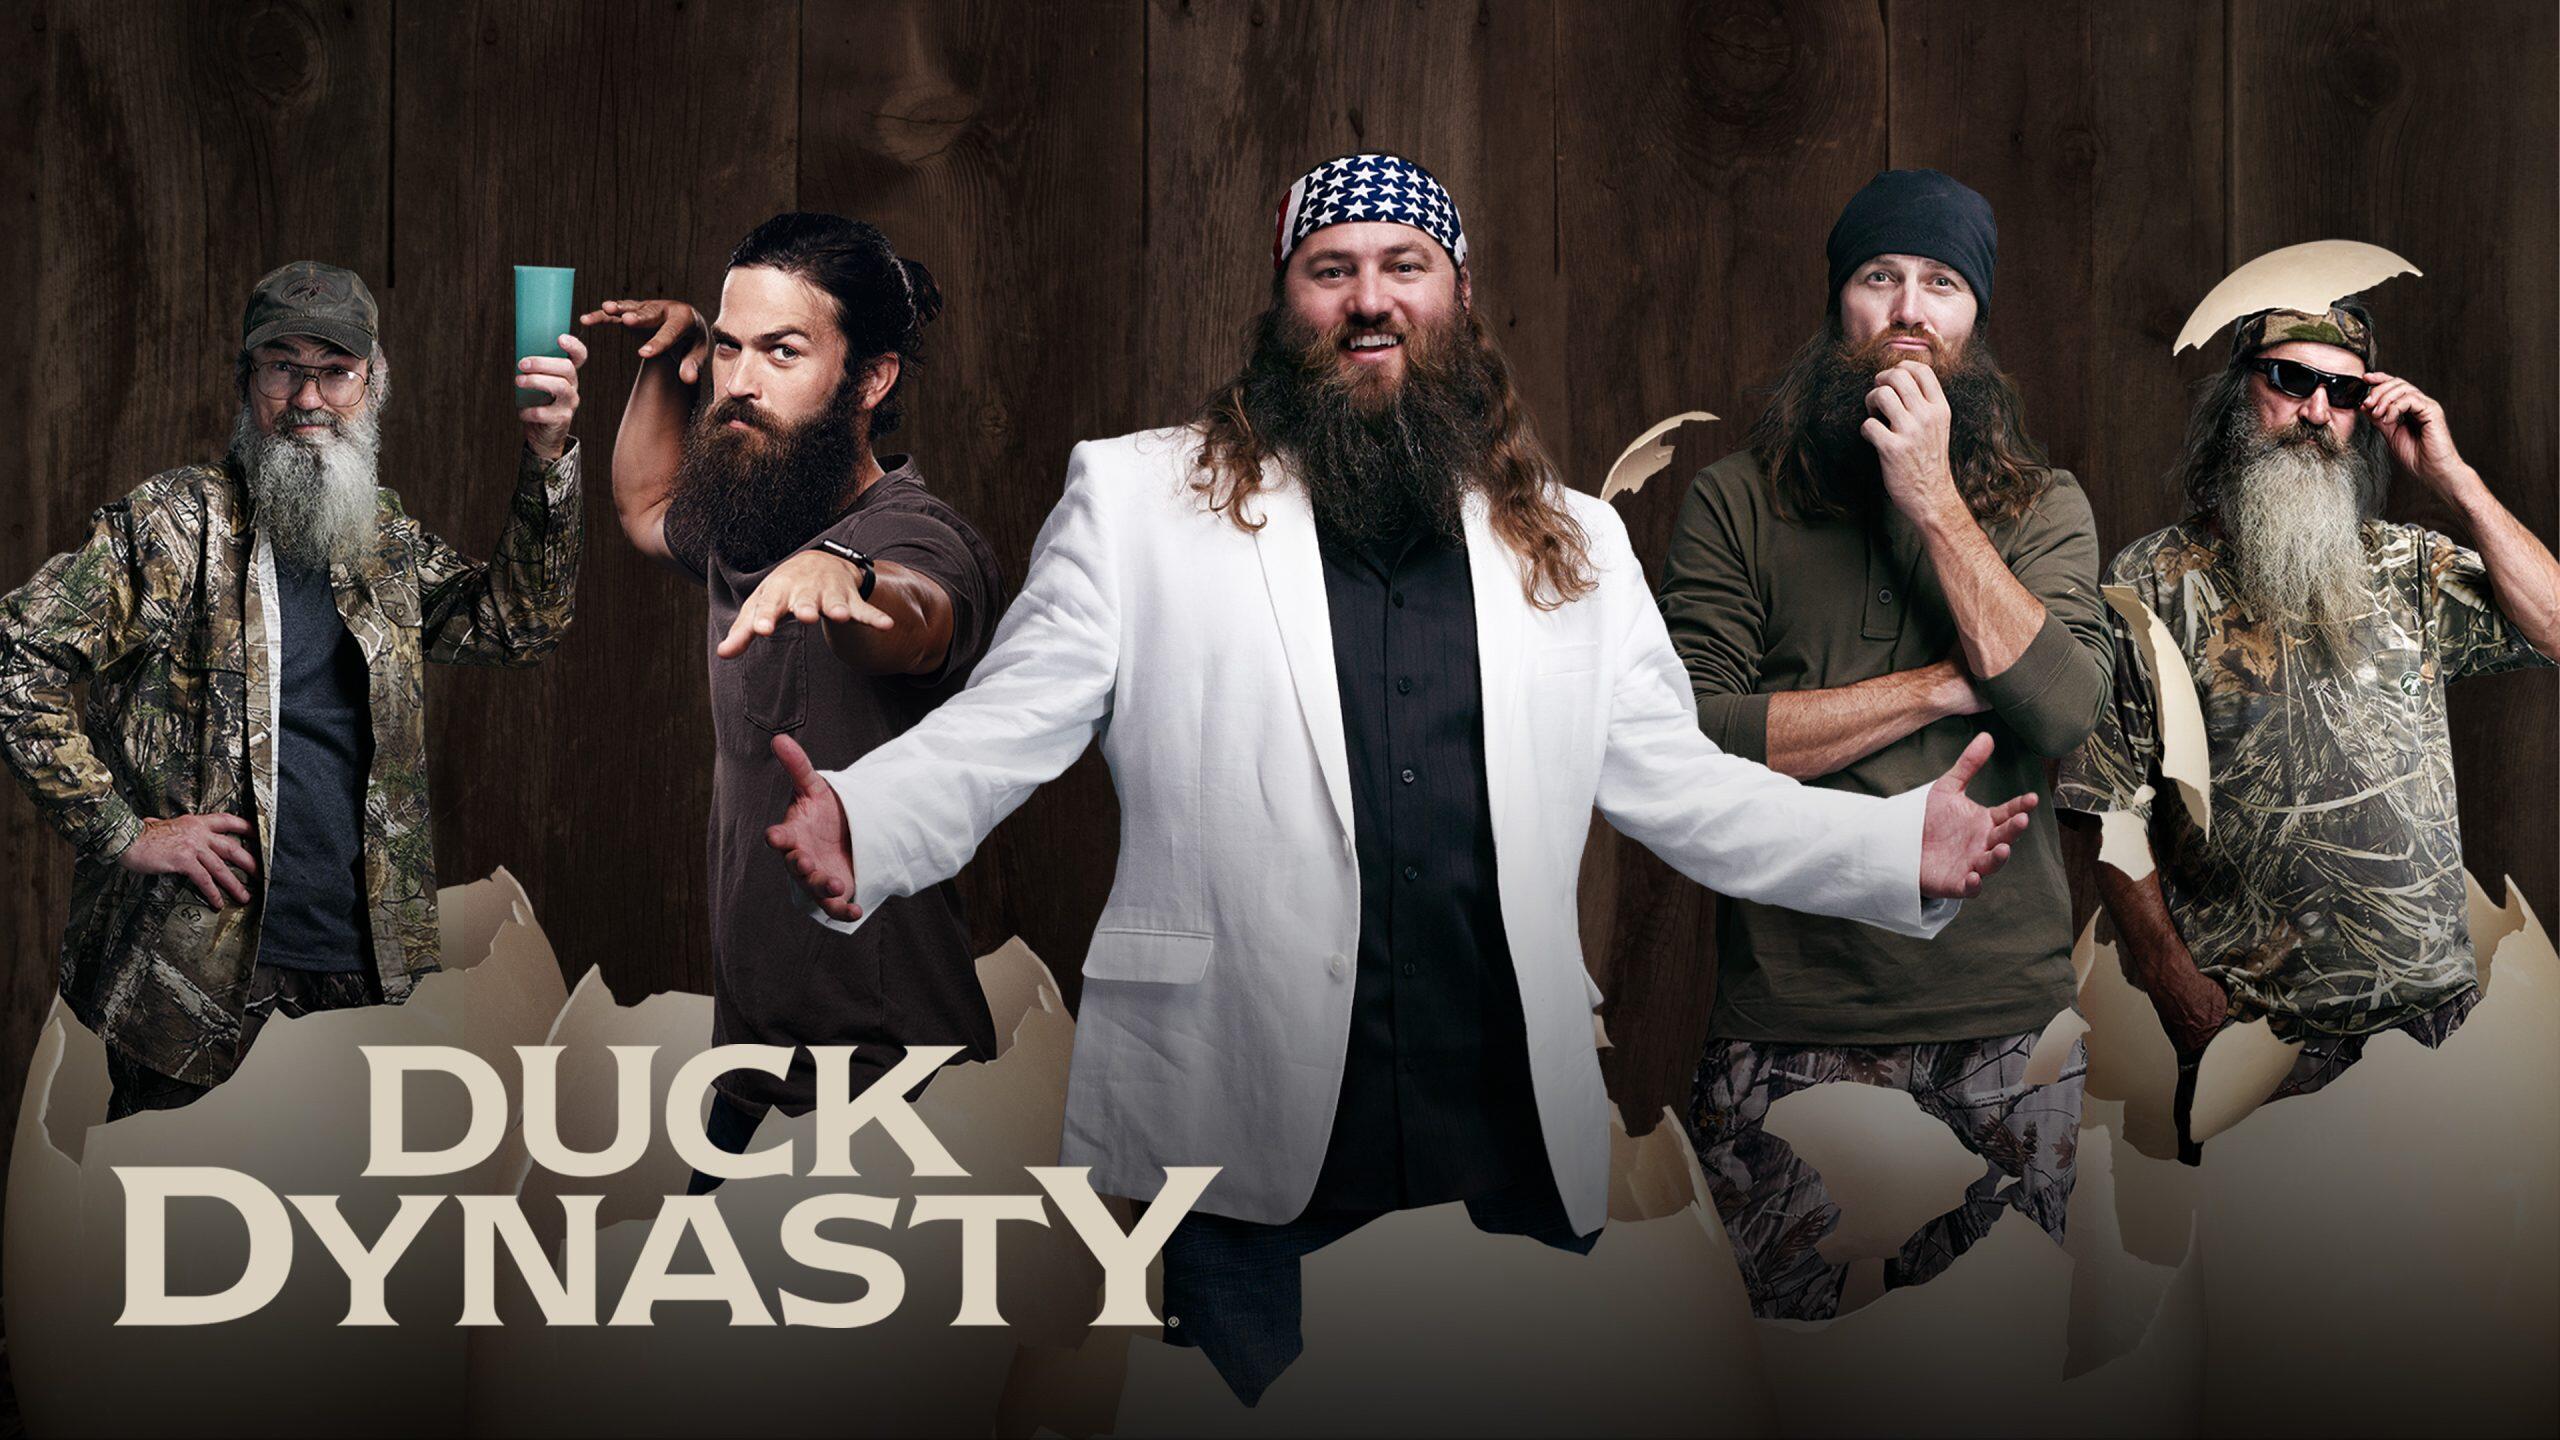 Duck dynasty images